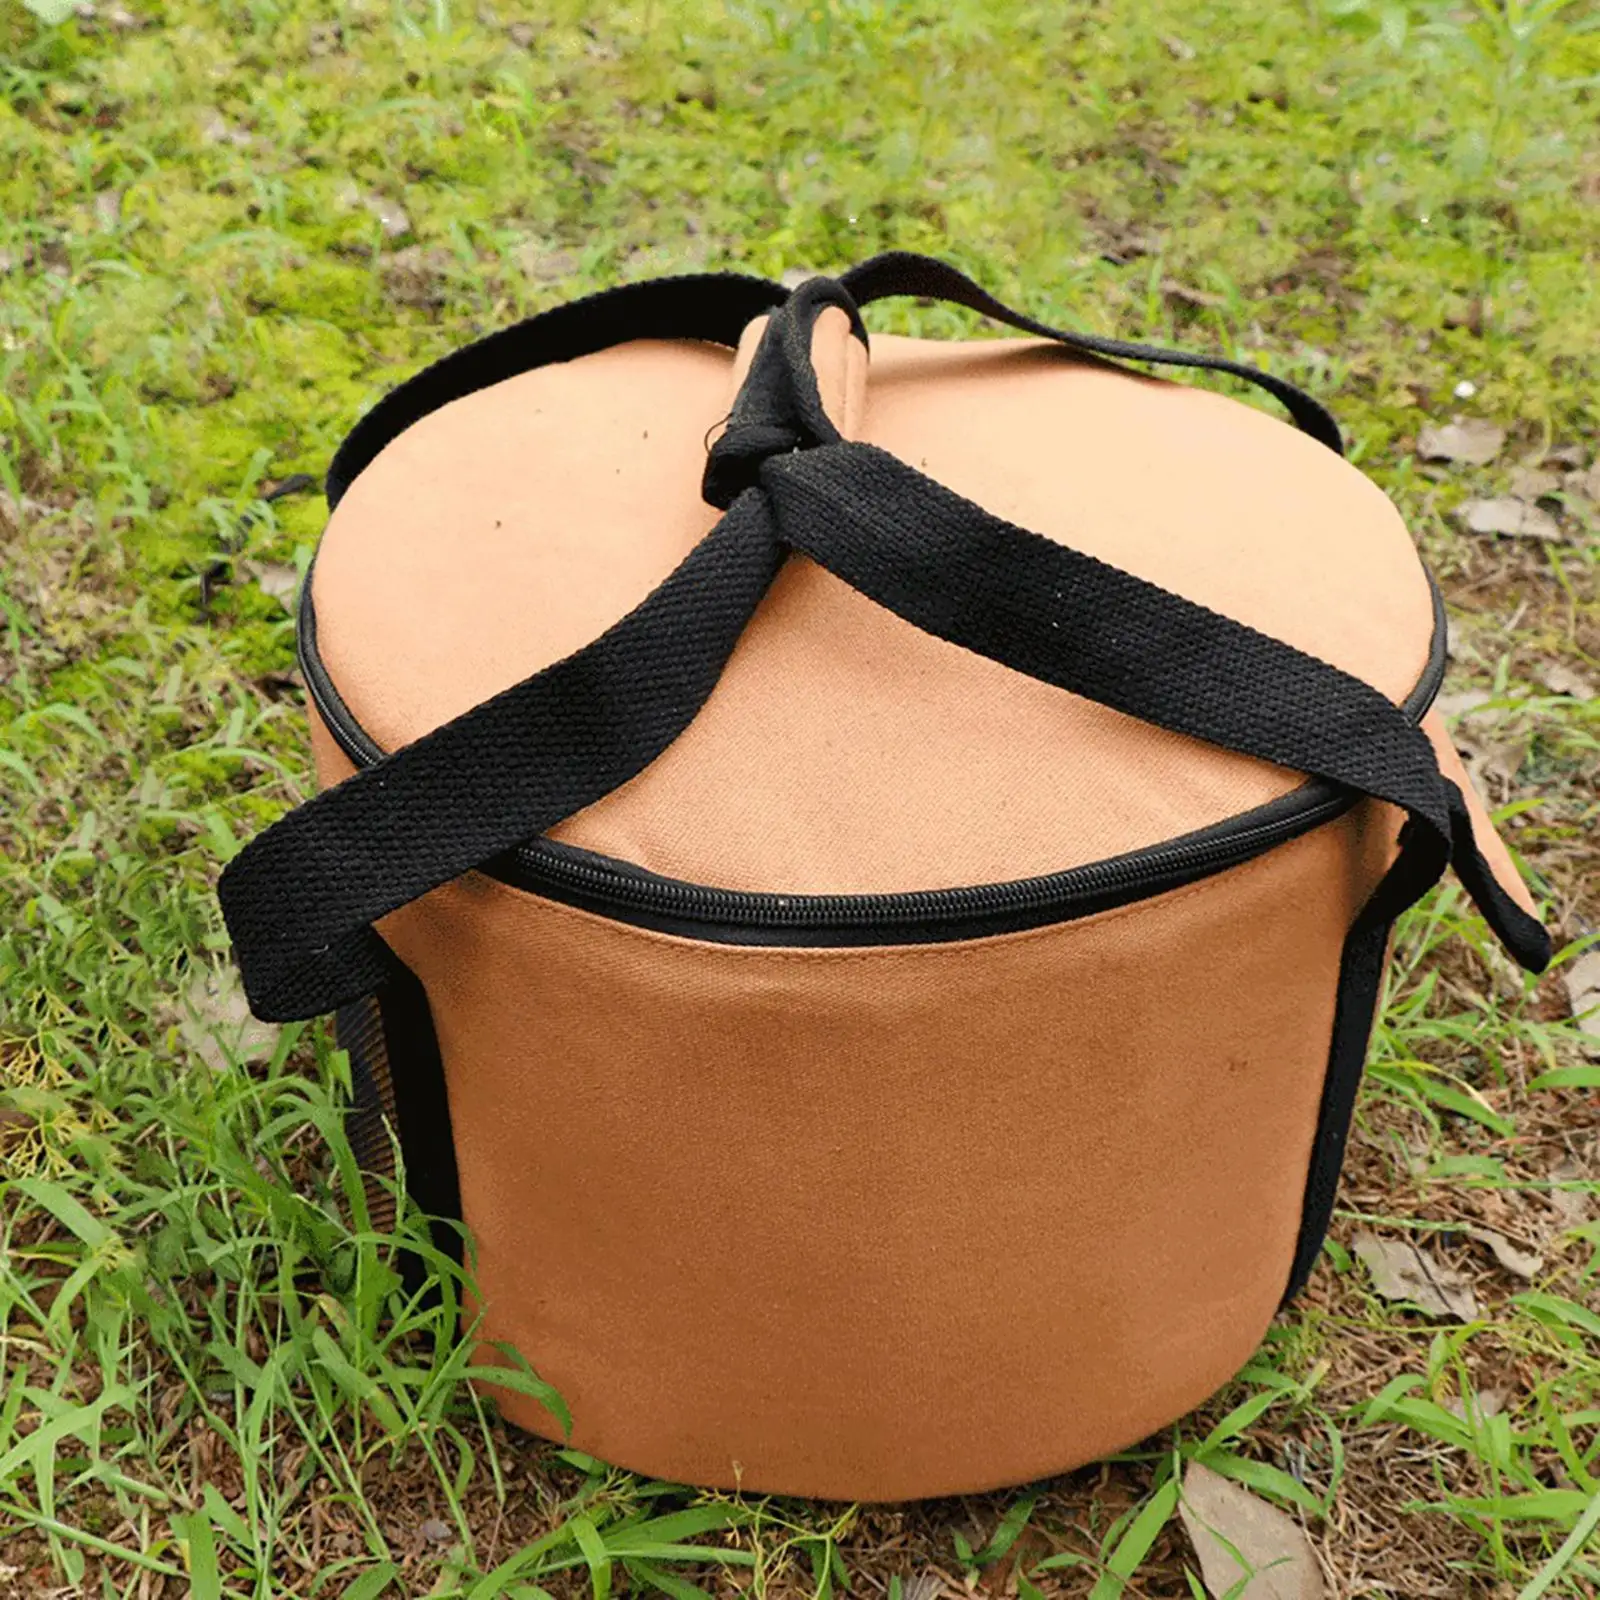 Camping Cookware Storage Bags Backpacking Cooking Utensils Organizer Travel Bag Portable Pouch   Barbecue Party Picnic